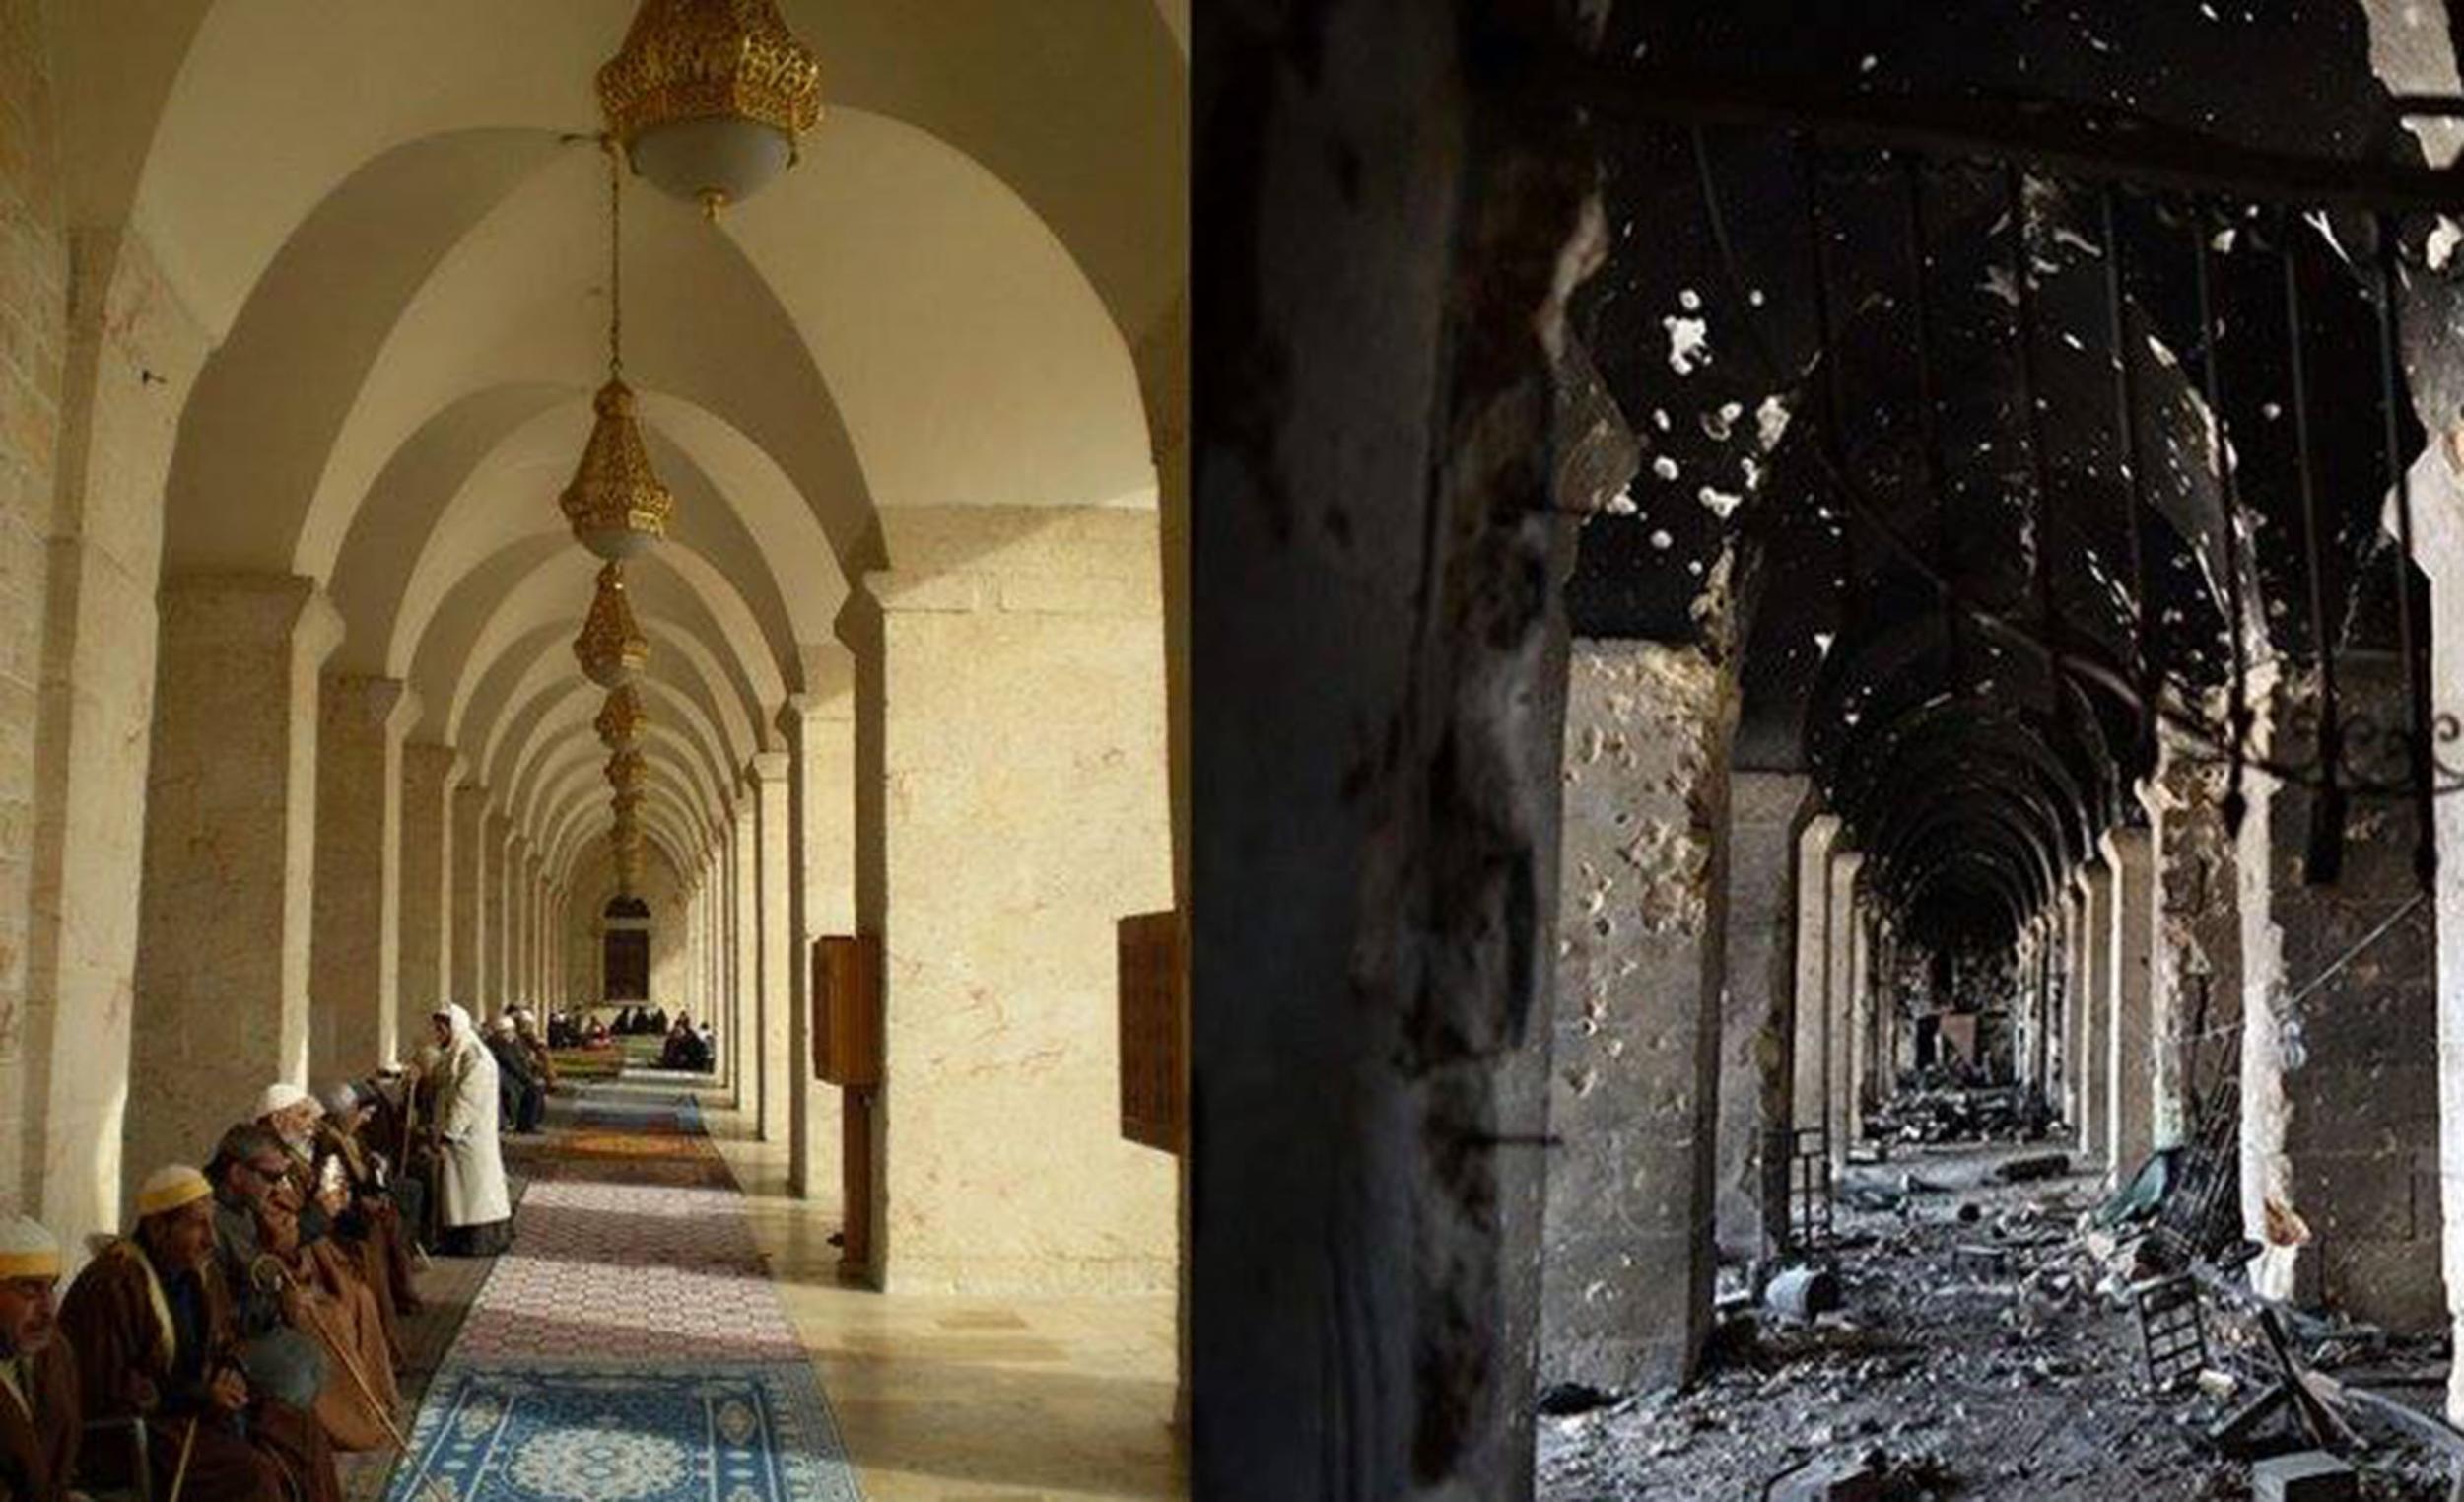 Like day and night, the Umayyad Mosque of Aleppo, built between the 8th and 13th centuries, is one of many historic sites left in charred ruins after heavy fighting